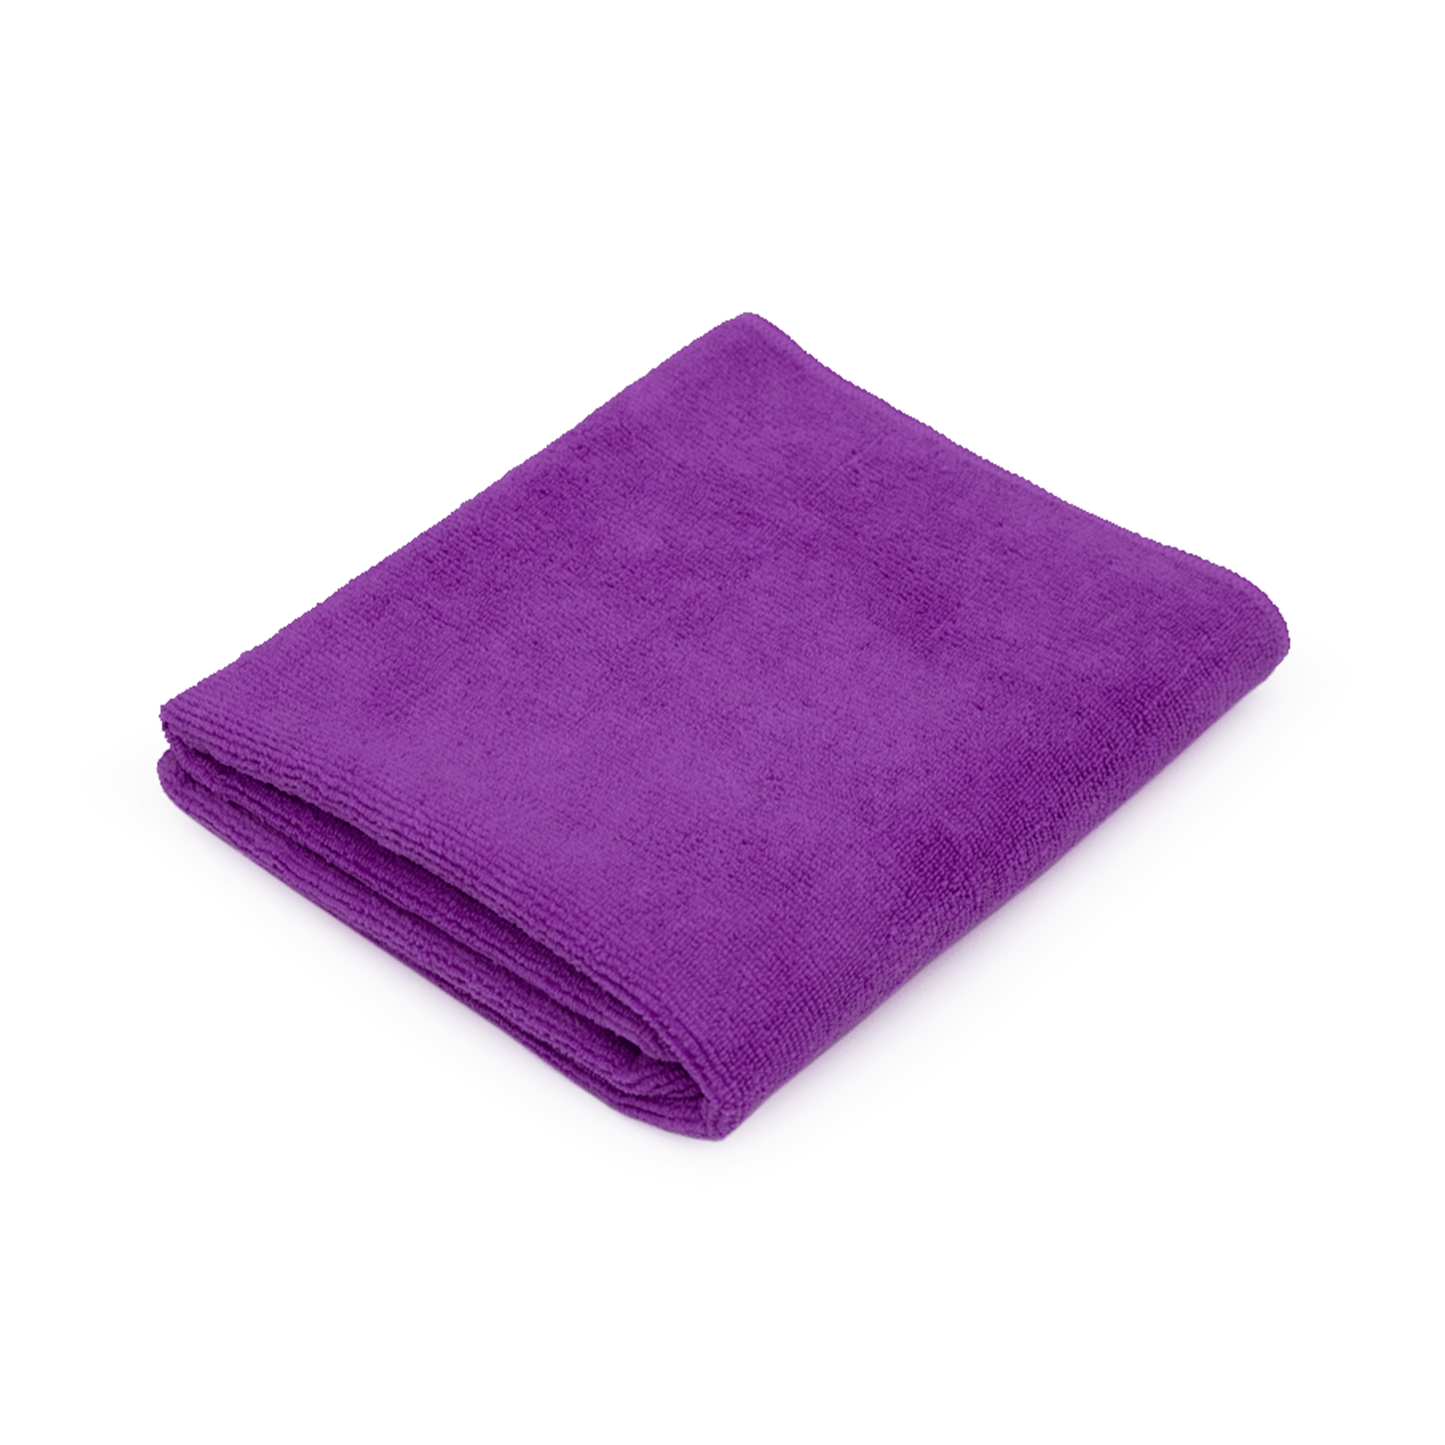 Car Wash Towels - Regal Towel Collection (RTC) On American Textile